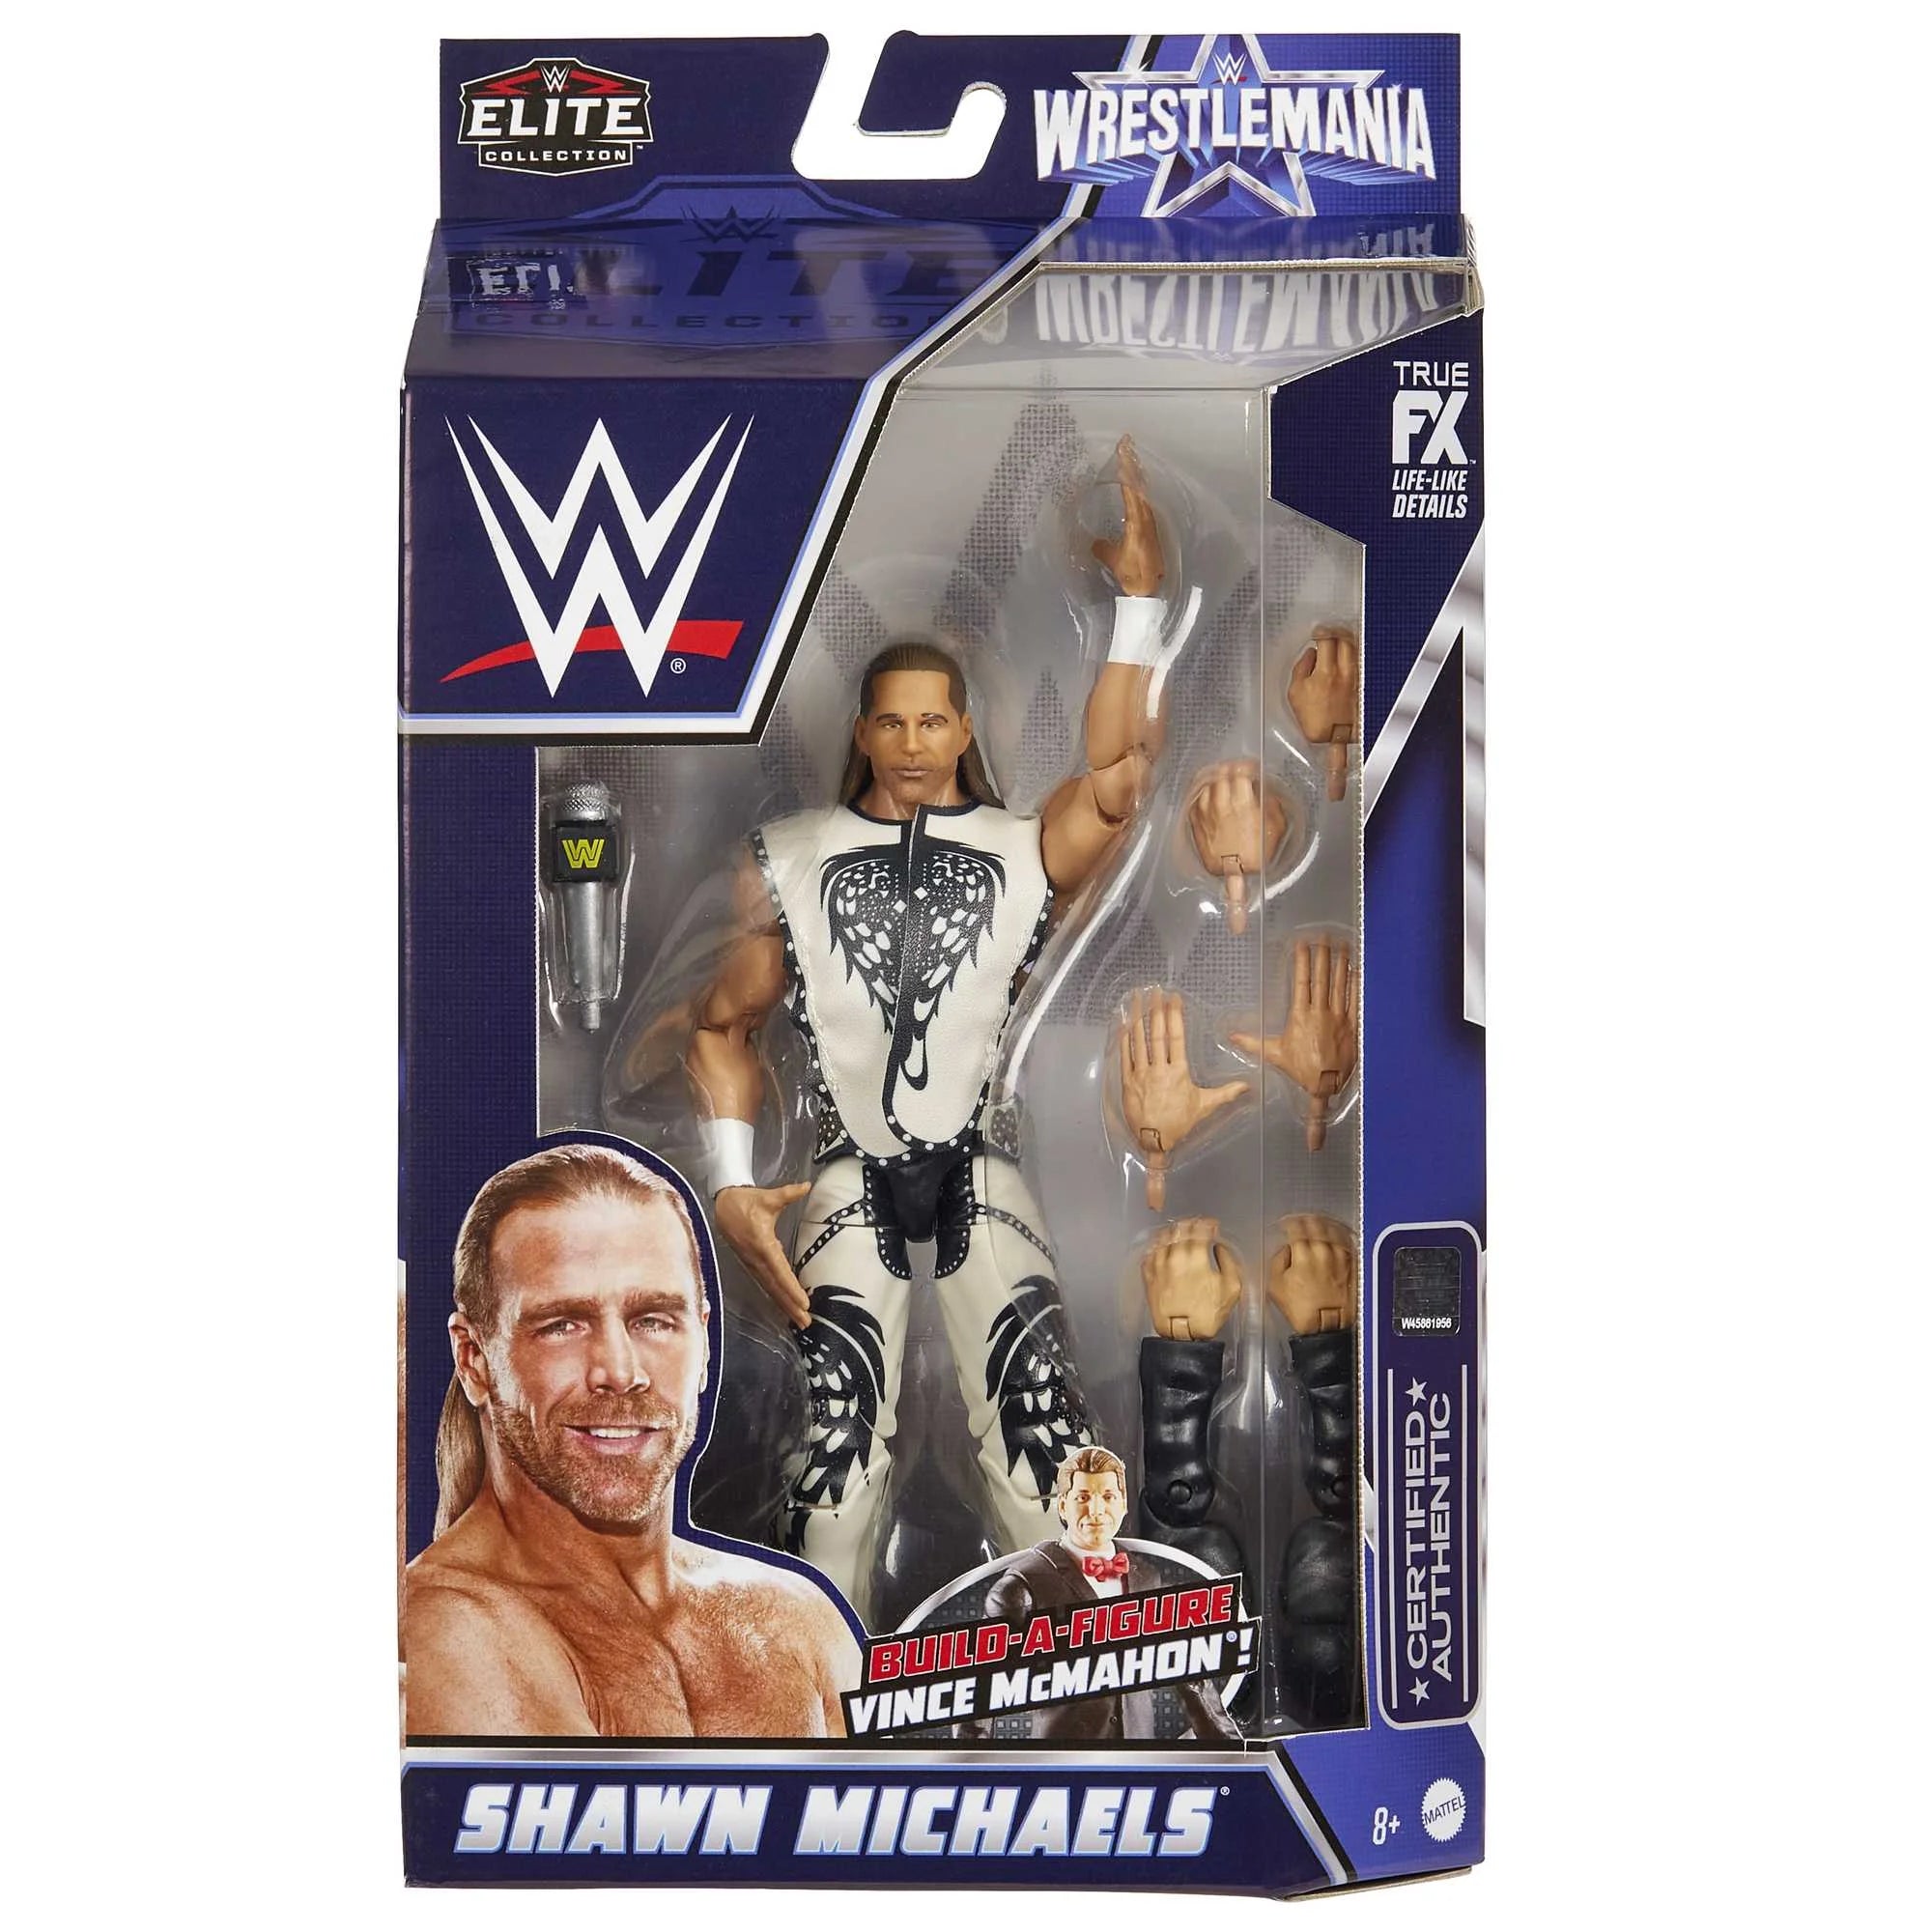 WWE Shawn Michaels WrestleMania Elite Collection Action Figure with Entrance Gear